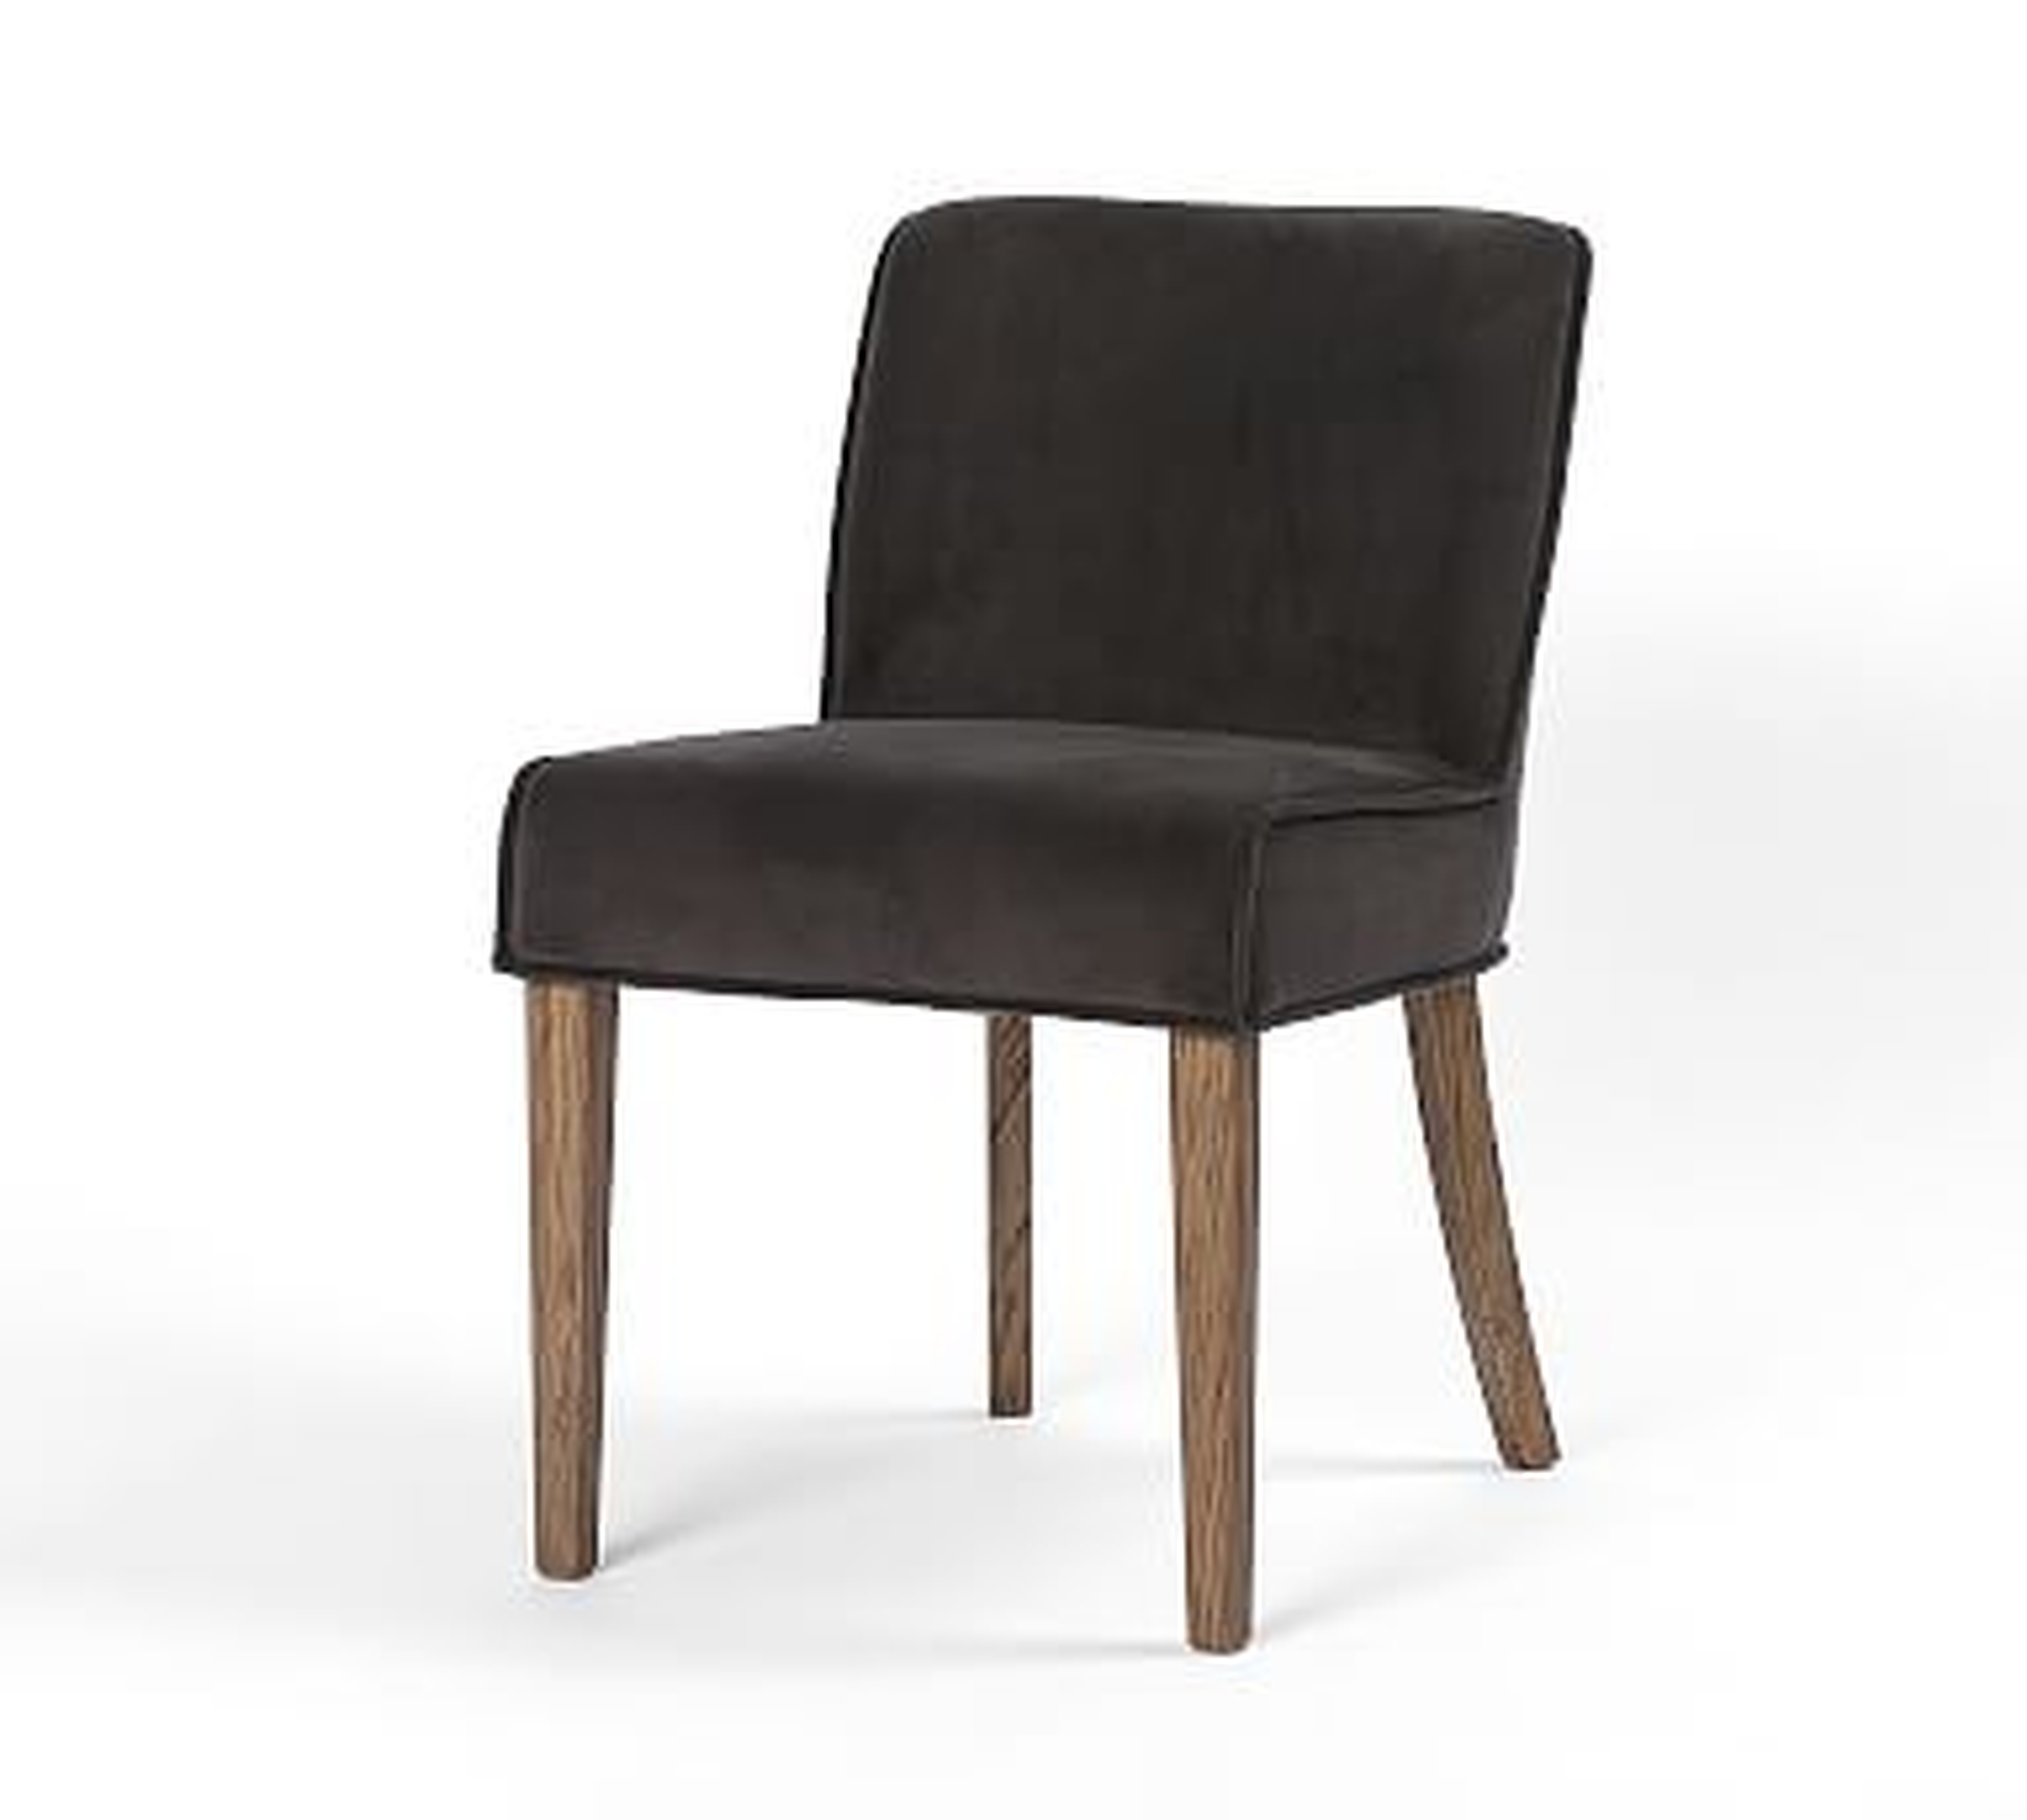 Lombard Dining Chair, Chocolate/Charcoal Velvet - Pottery Barn